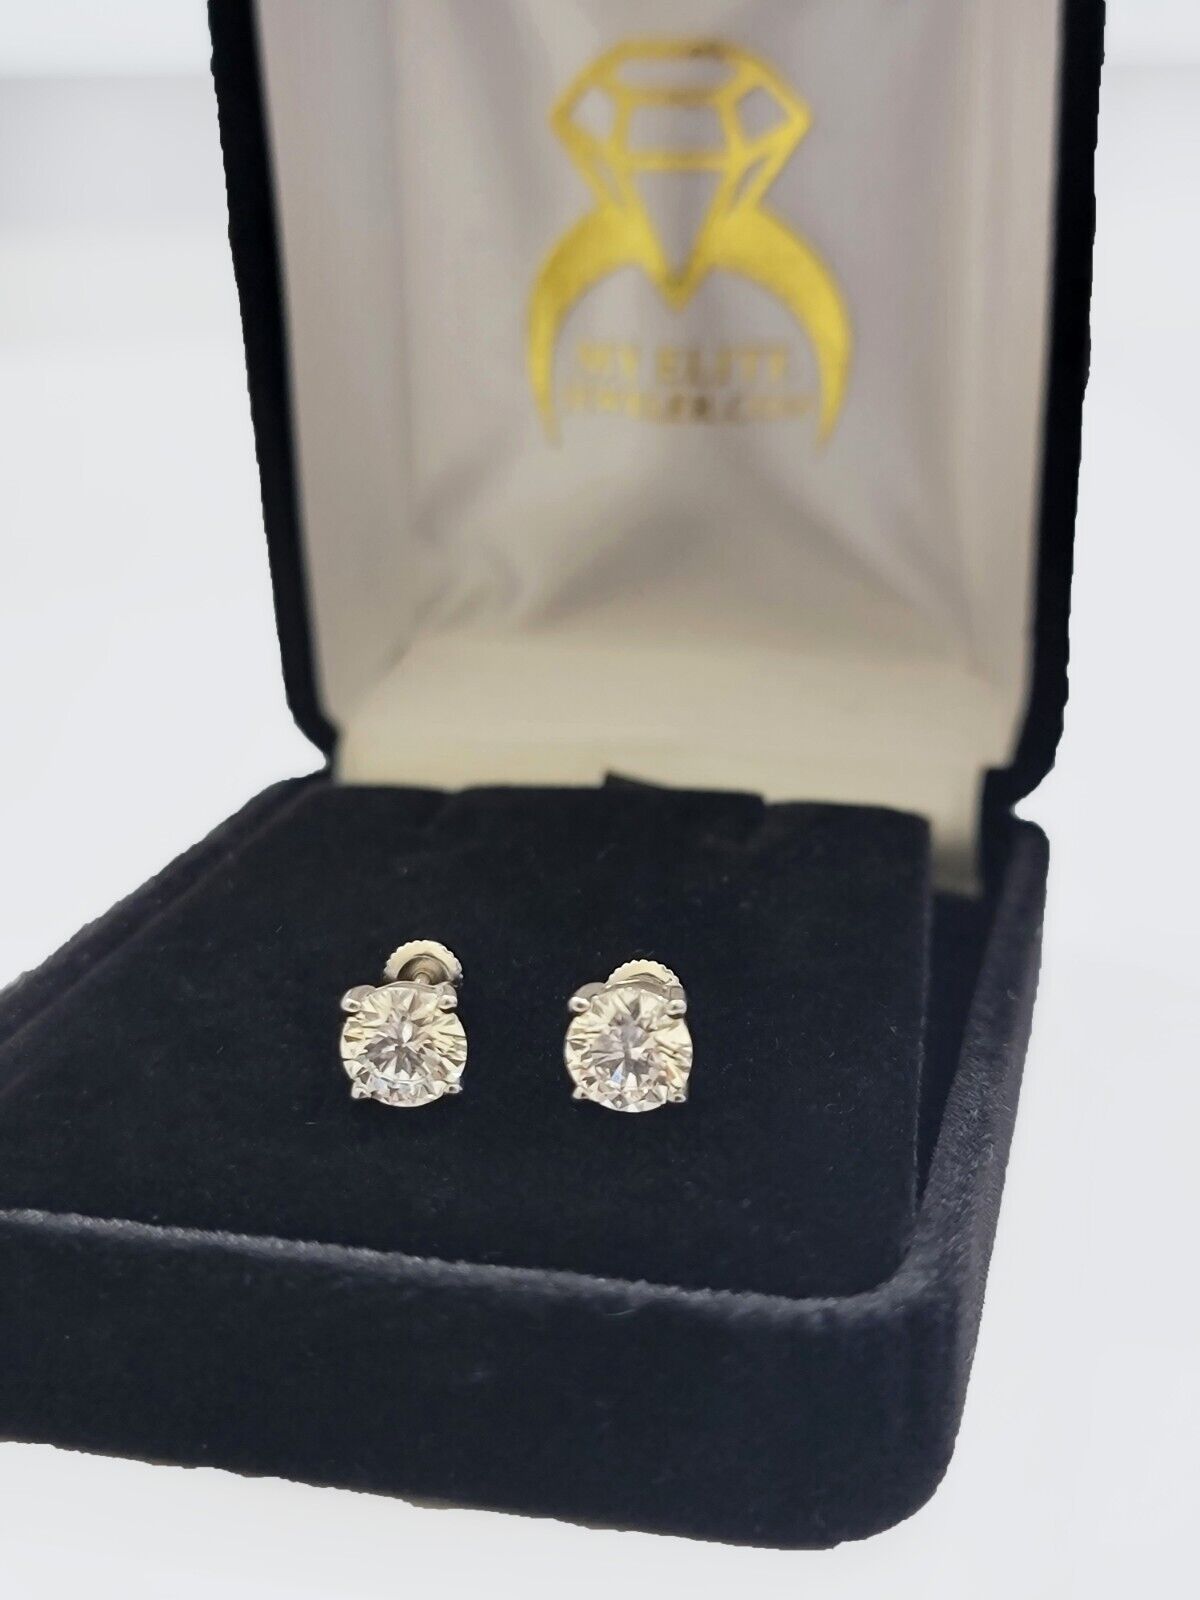 Real 2CT Round Brilliant Cut Diamond Stud Earring In 14K Gold Lab Created VS ADJUSTED LISTING